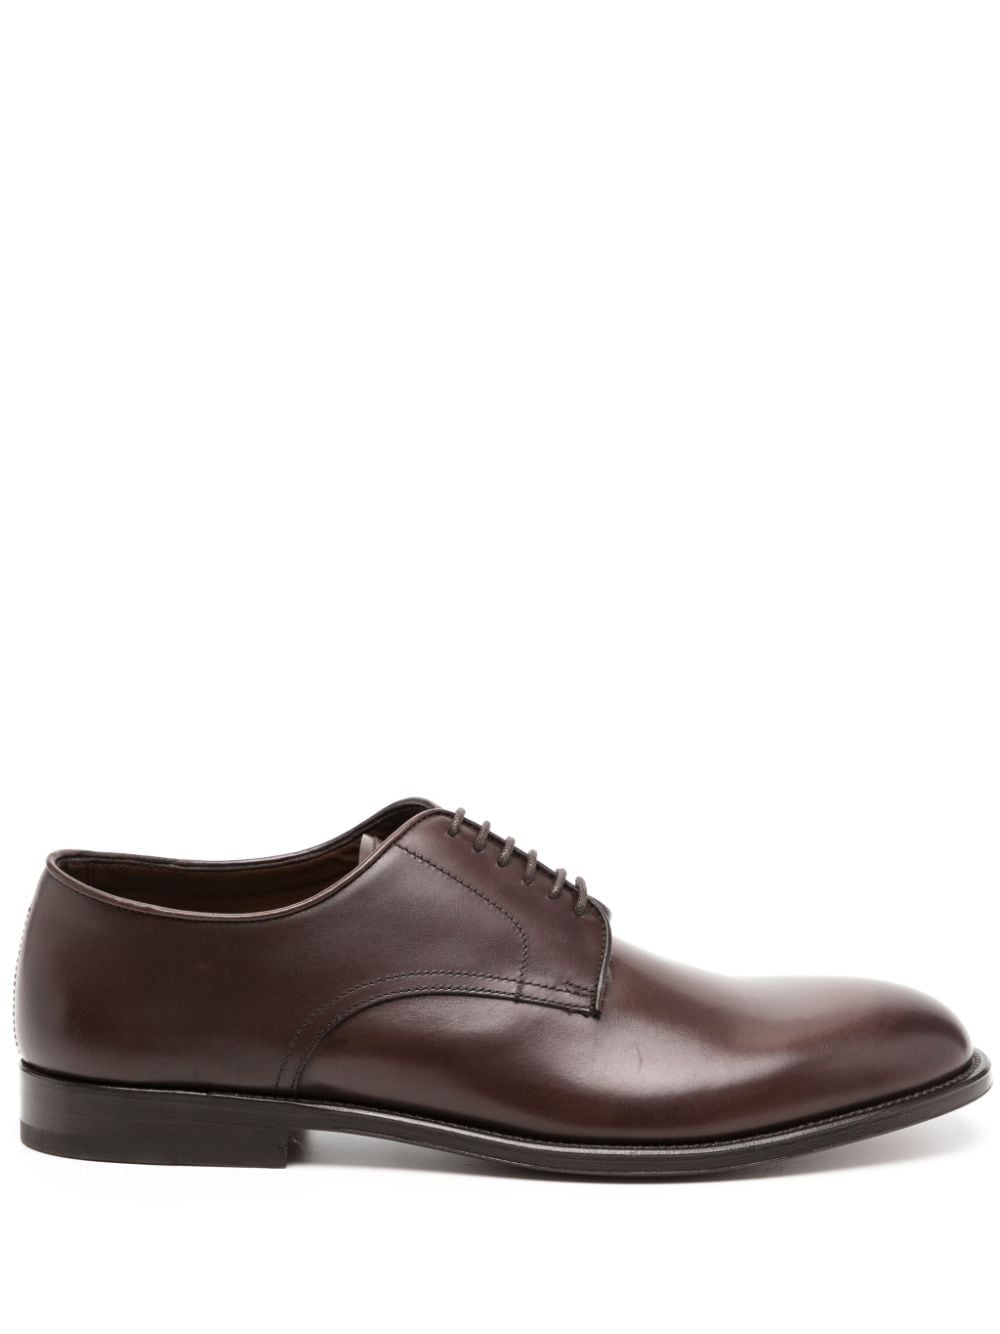 Fratelli Rossetti lace-up leather derby shoes - Brown von Fratelli Rossetti